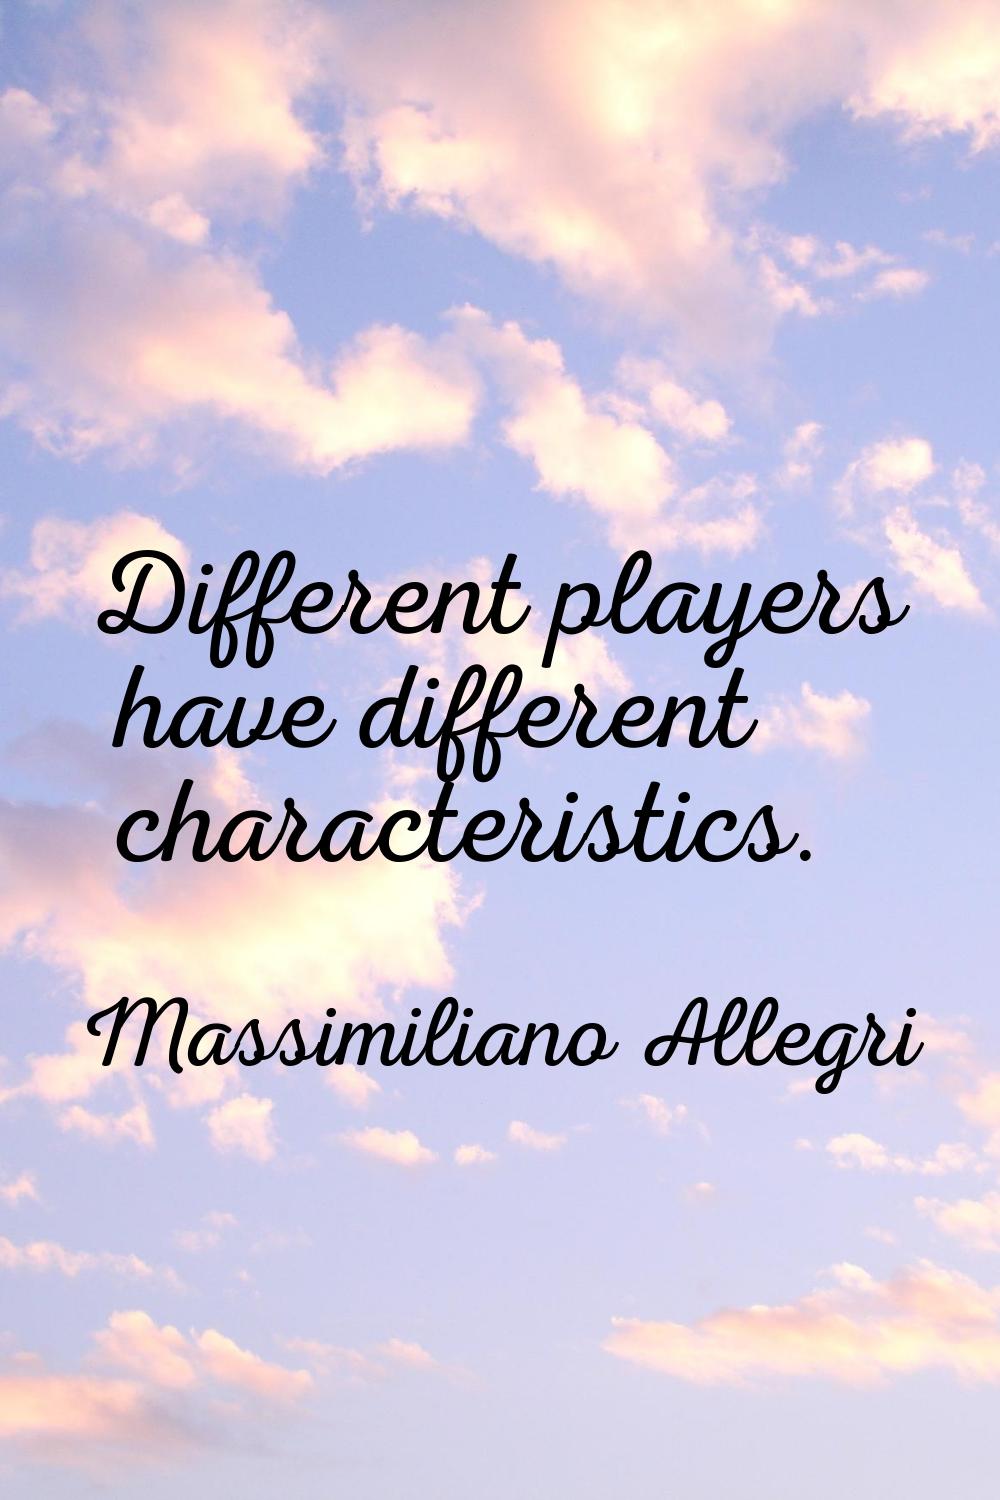 Different players have different characteristics.